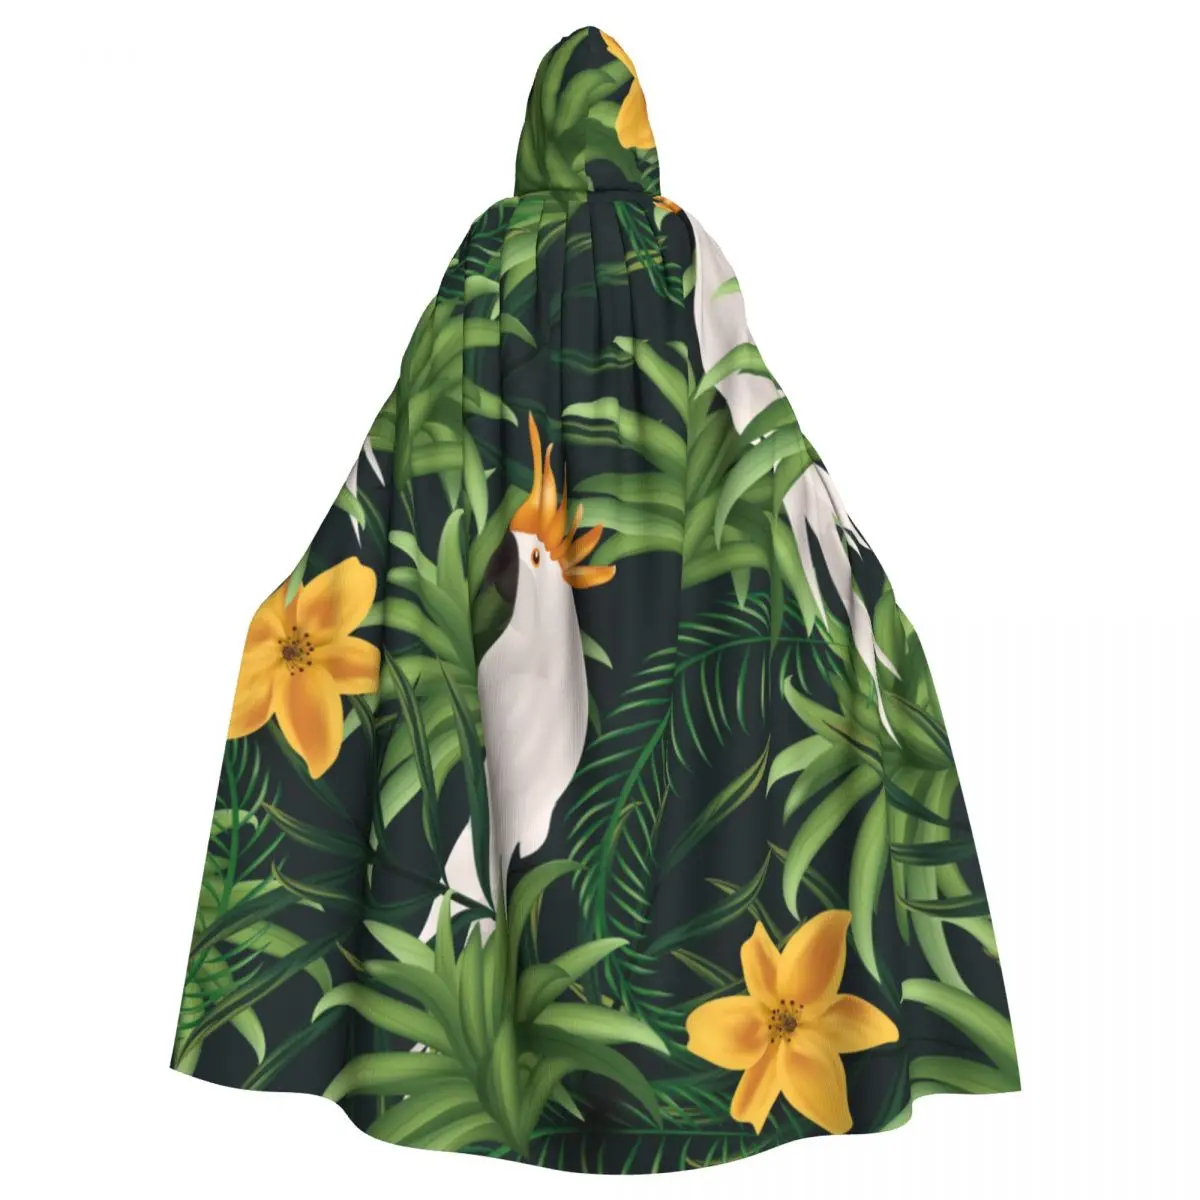 

Hooded Cloak Unisex Cloak with Hood Tropical Leaves Parrots Cloak Vampire Witch Cape Cosplay Costume